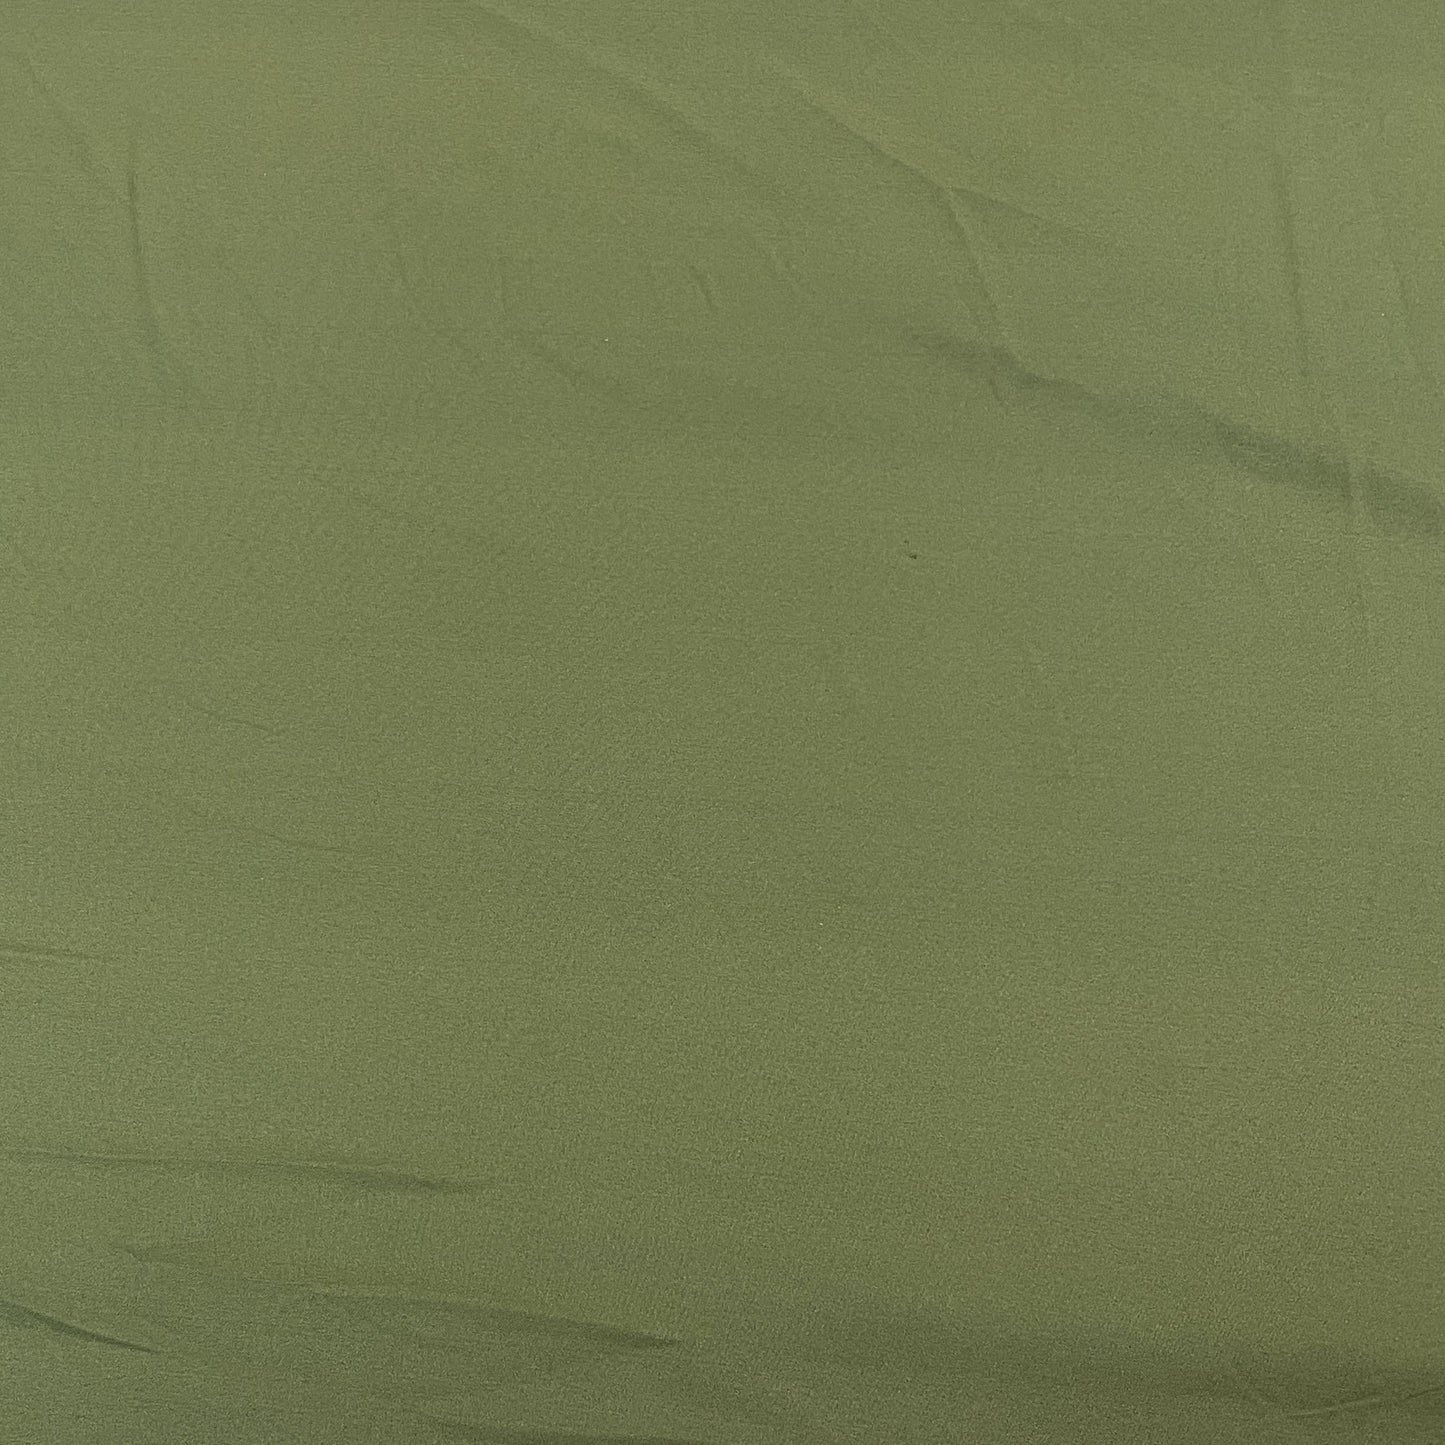 Exclusive Army Green Solid Malai Crepe Fabric